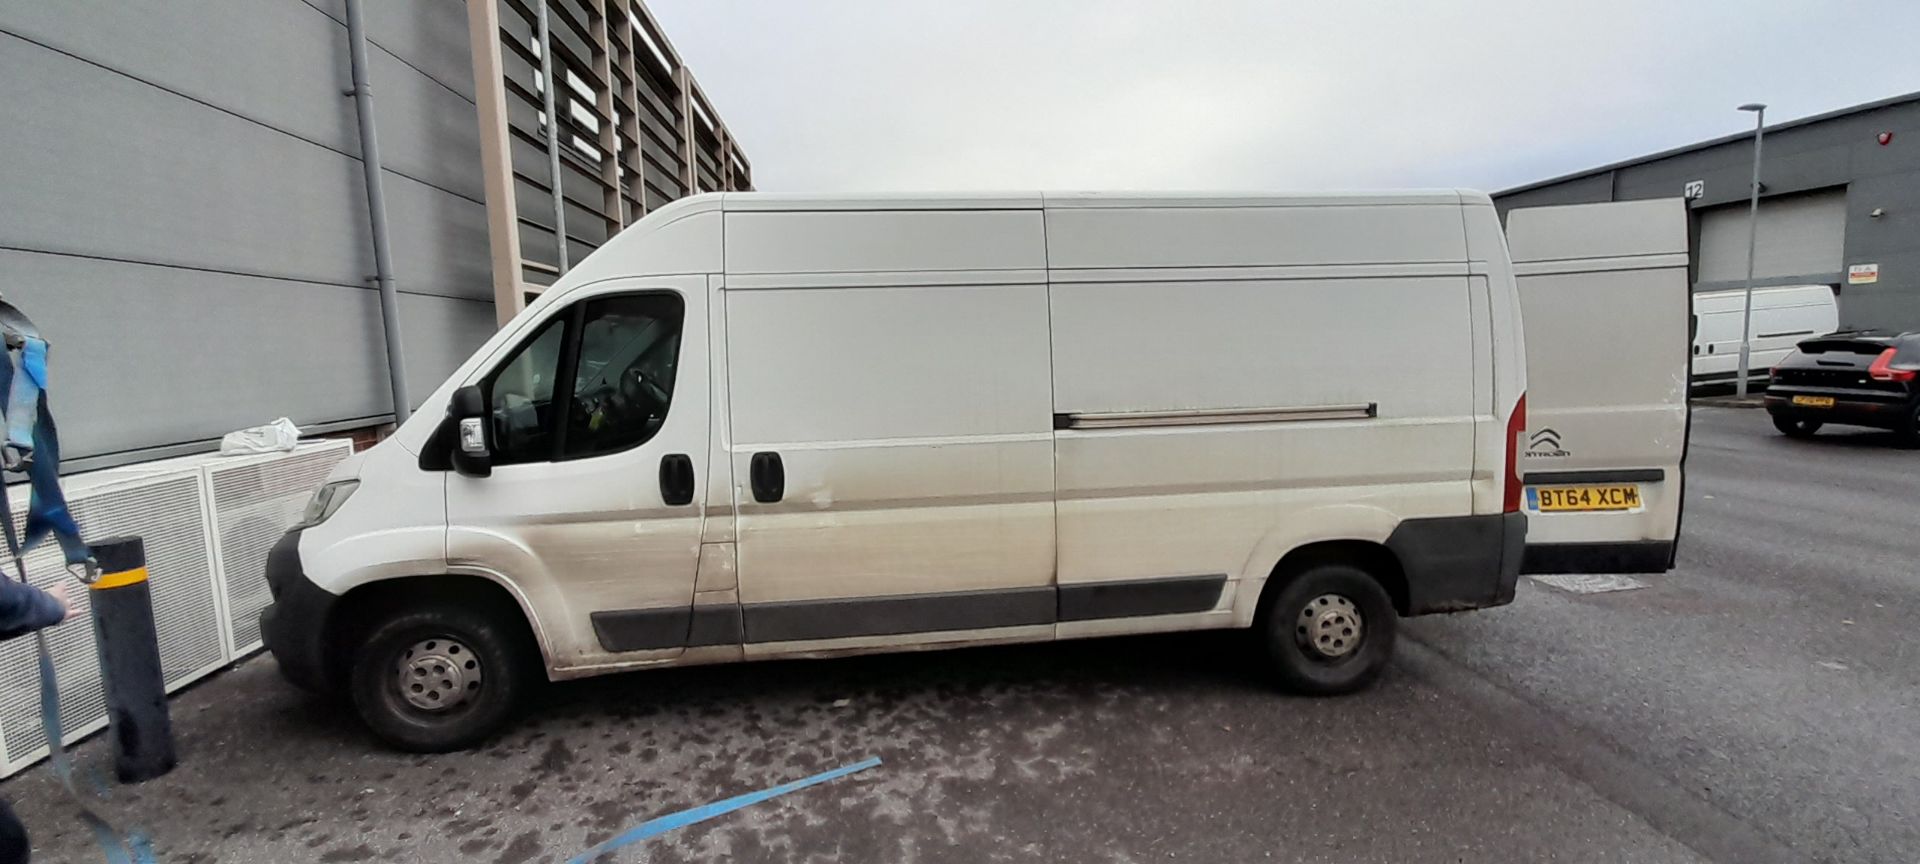 Citroen Relay Registration BT64 XCM, 104,109 miles - This vehicle does not have a V5C Document, the - Image 4 of 11